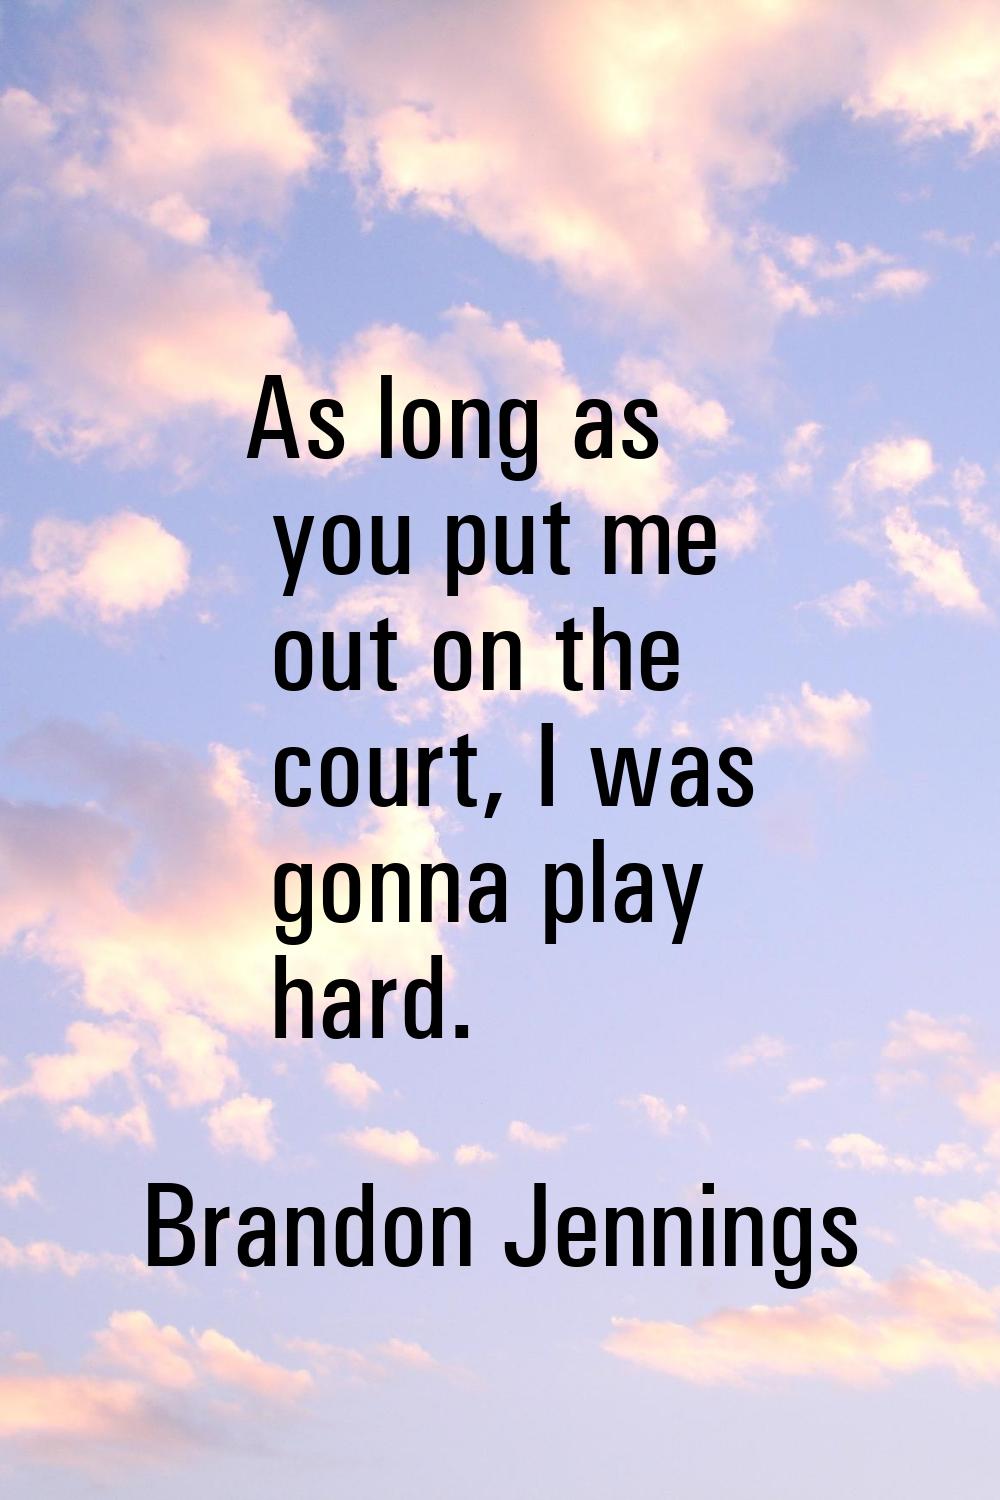 As long as you put me out on the court, I was gonna play hard.